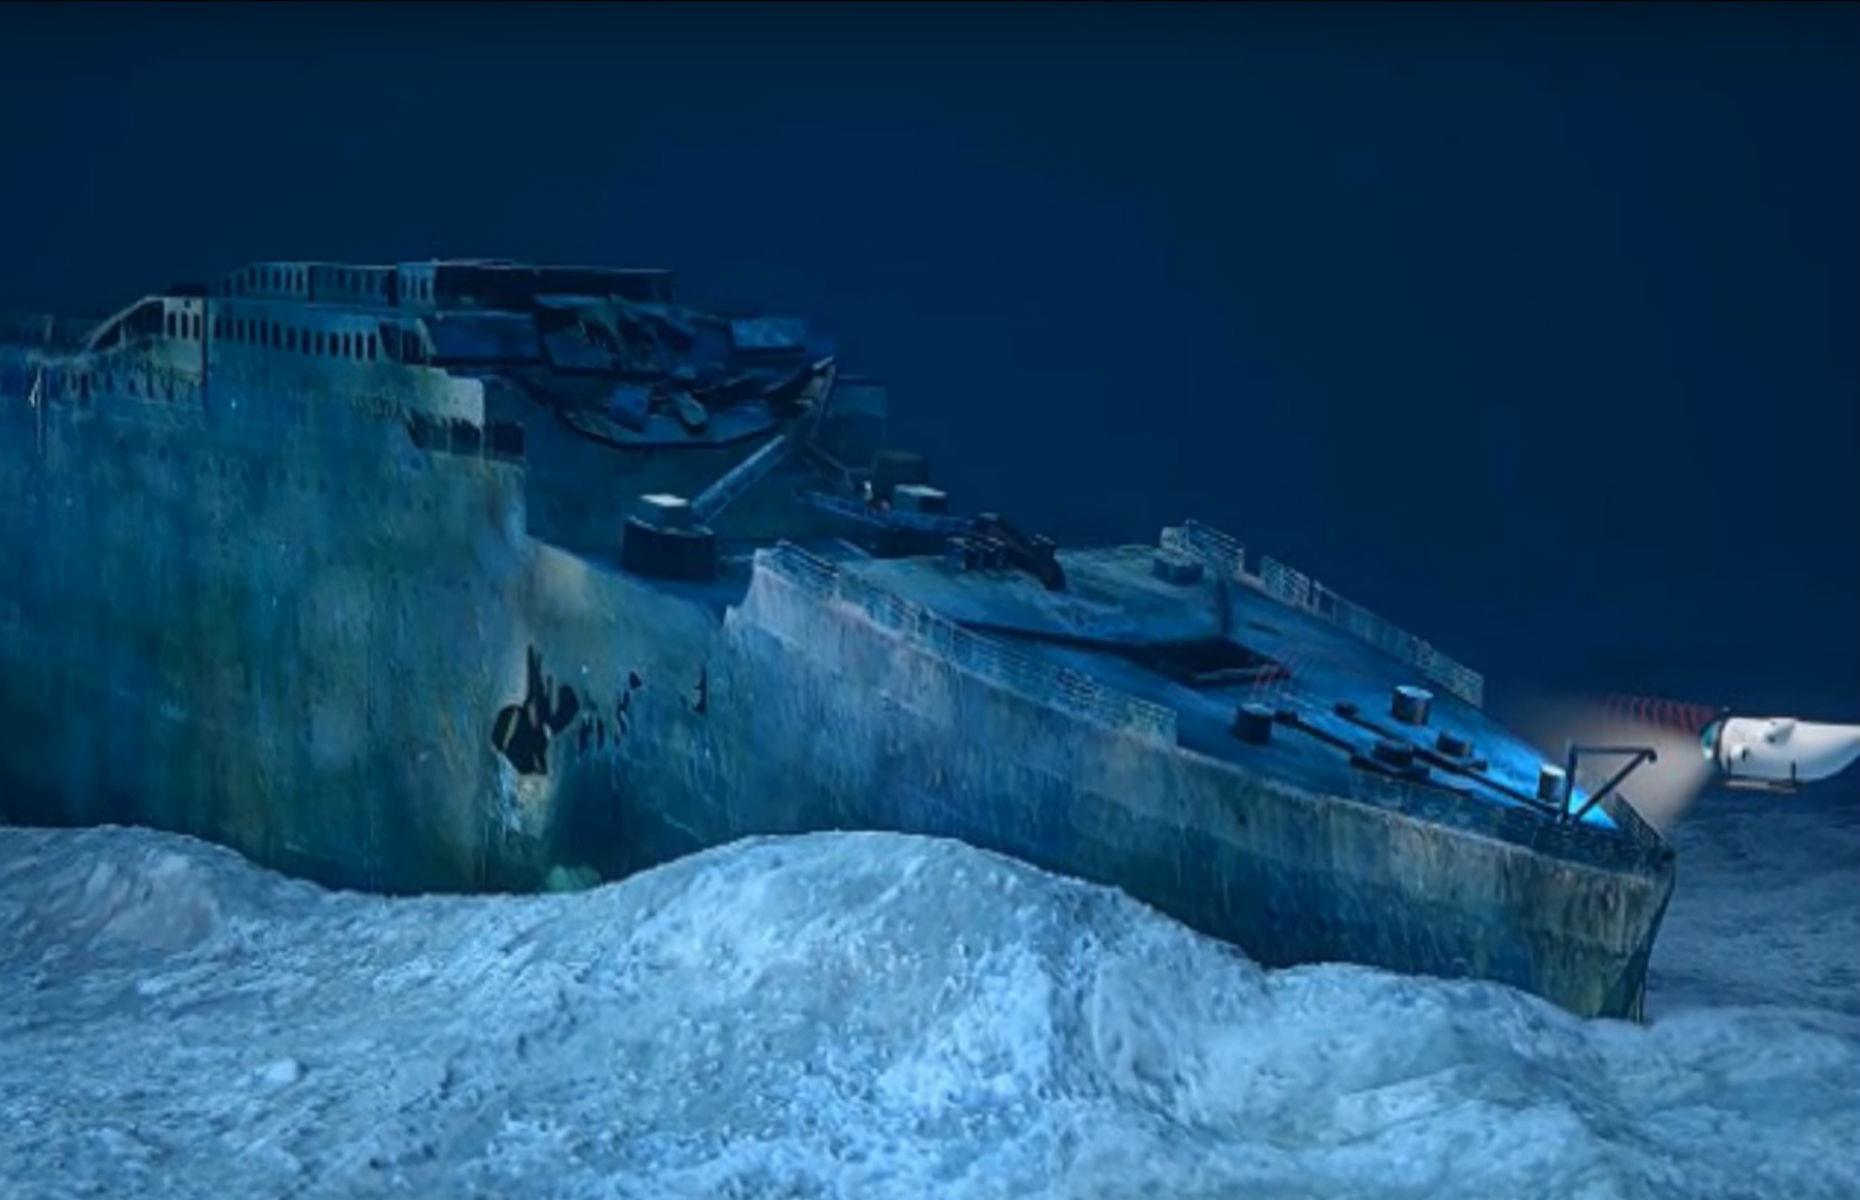 Unearth the remains of the Titanic